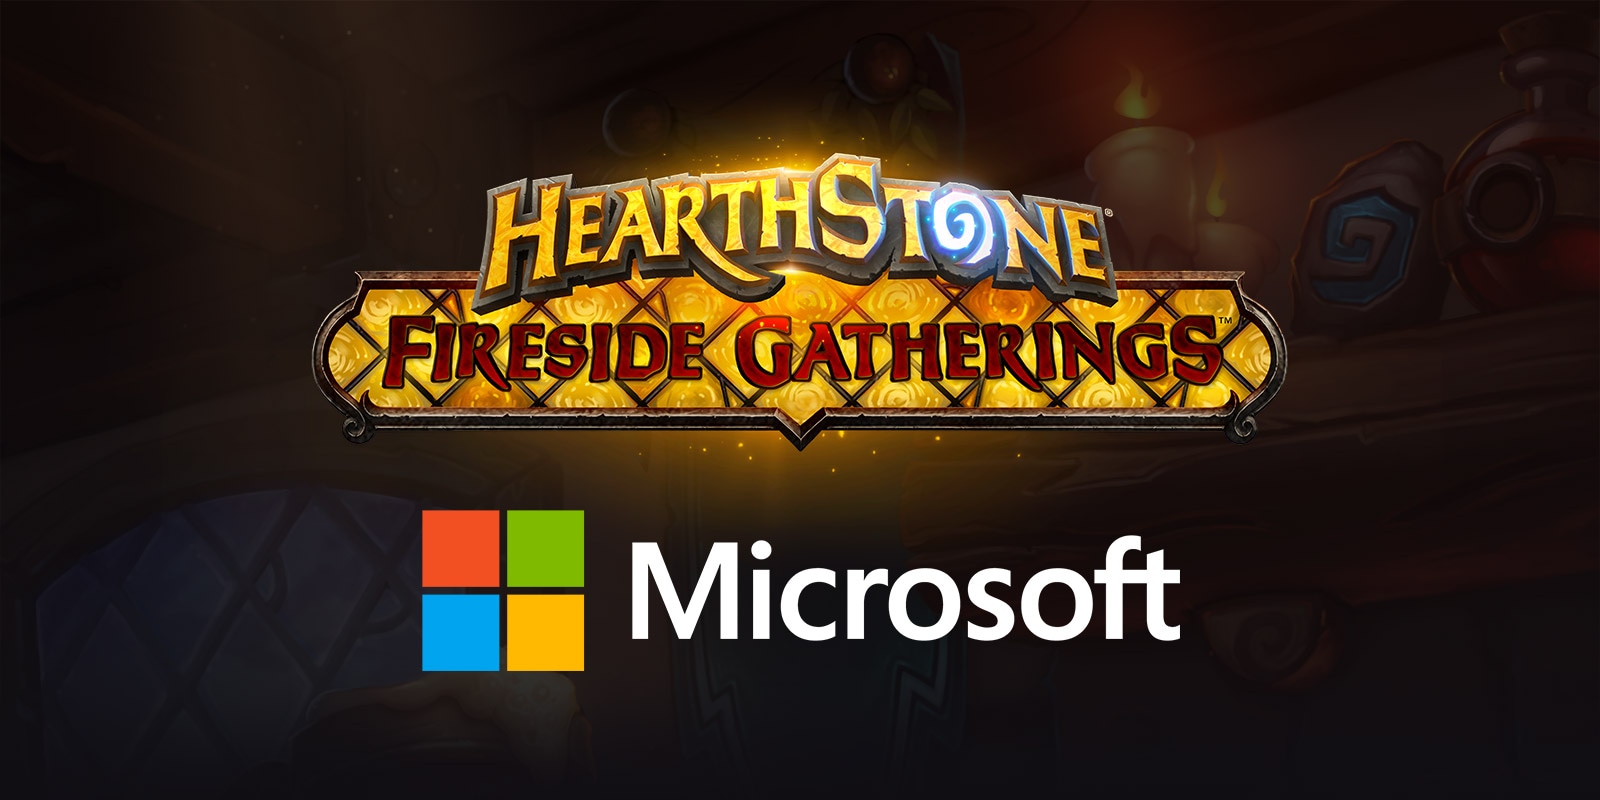 Join us by the hearth at a Microsoft Store Fireside Gathering!